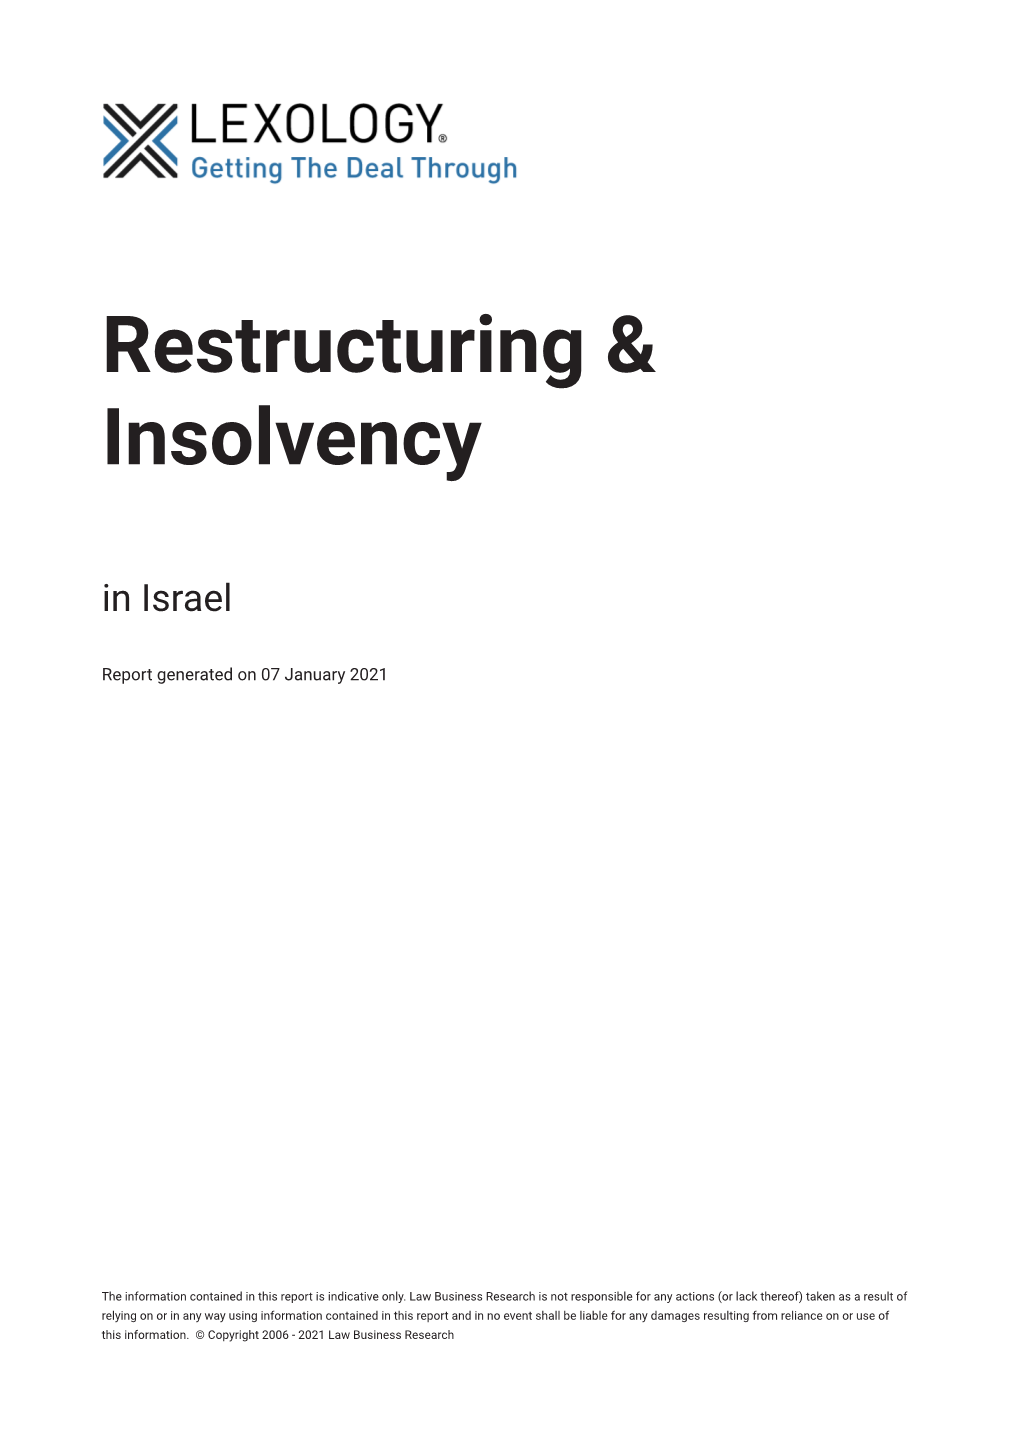 Restructuring & Insolvency in Israel